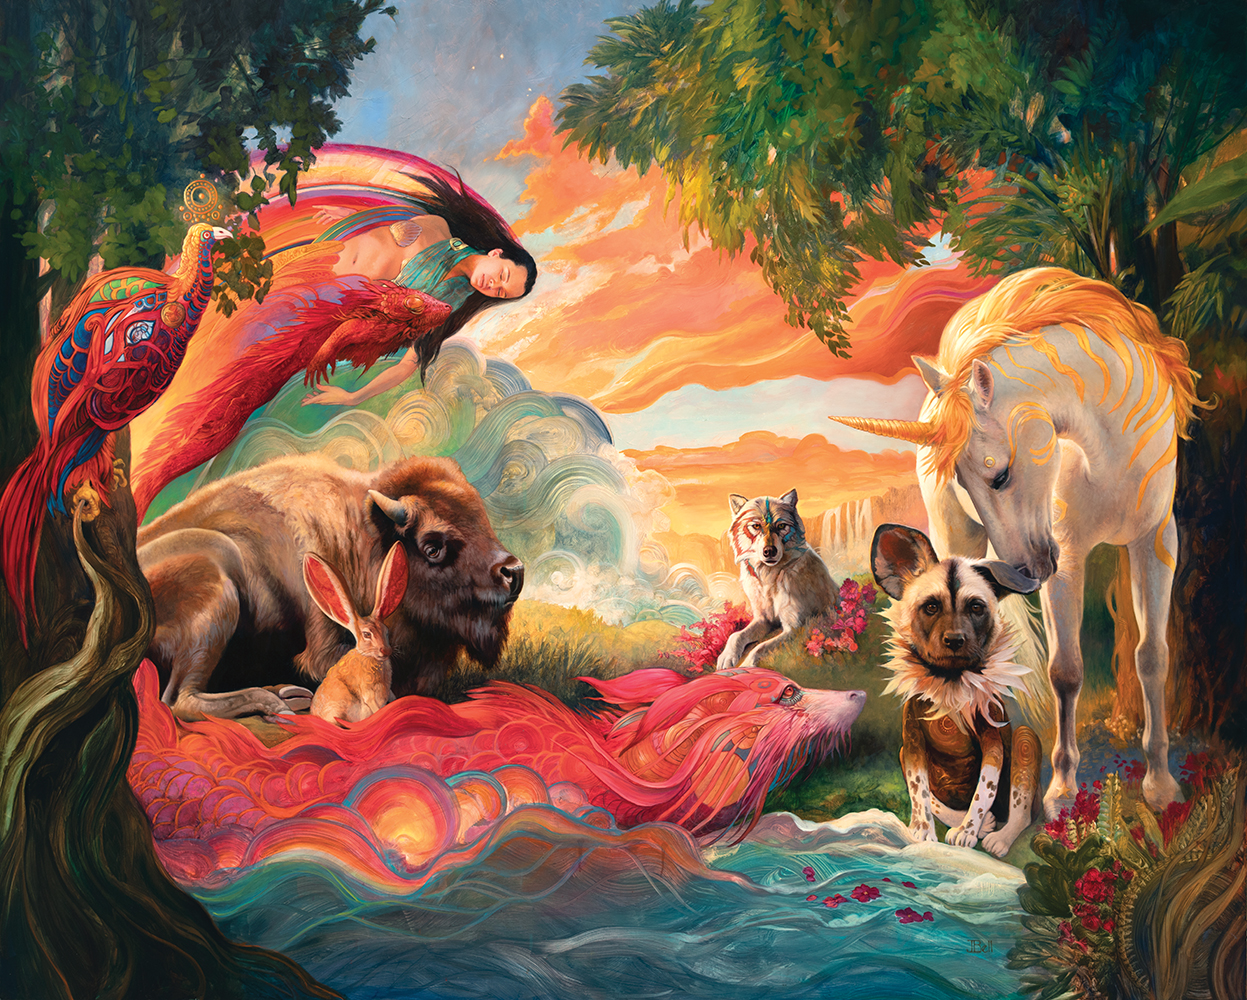 A magical rainbow wildlife scene with various mythical and real creatures.